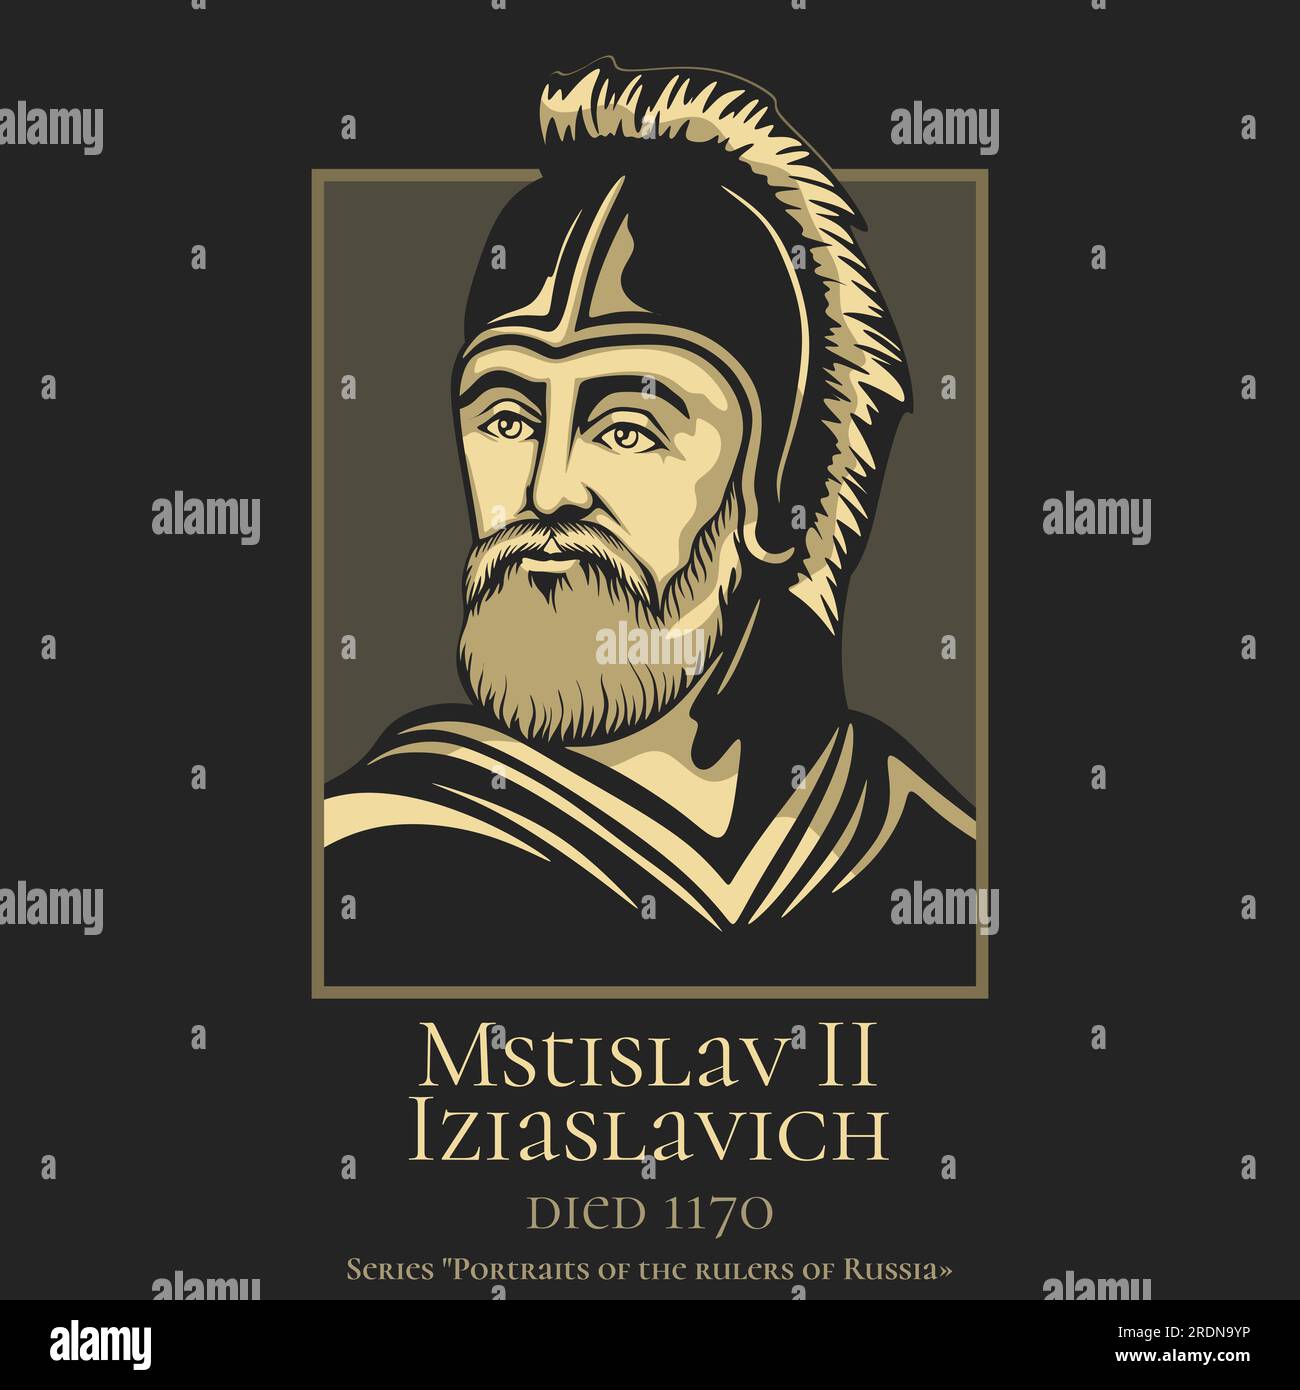 Portrait of the rulers of Russia. Mstislav II Iziaslavich (died 1170) was the prince of Pereiaslav and Volodymyr and the grand prince of Kiev. Mstisla Stock Vector